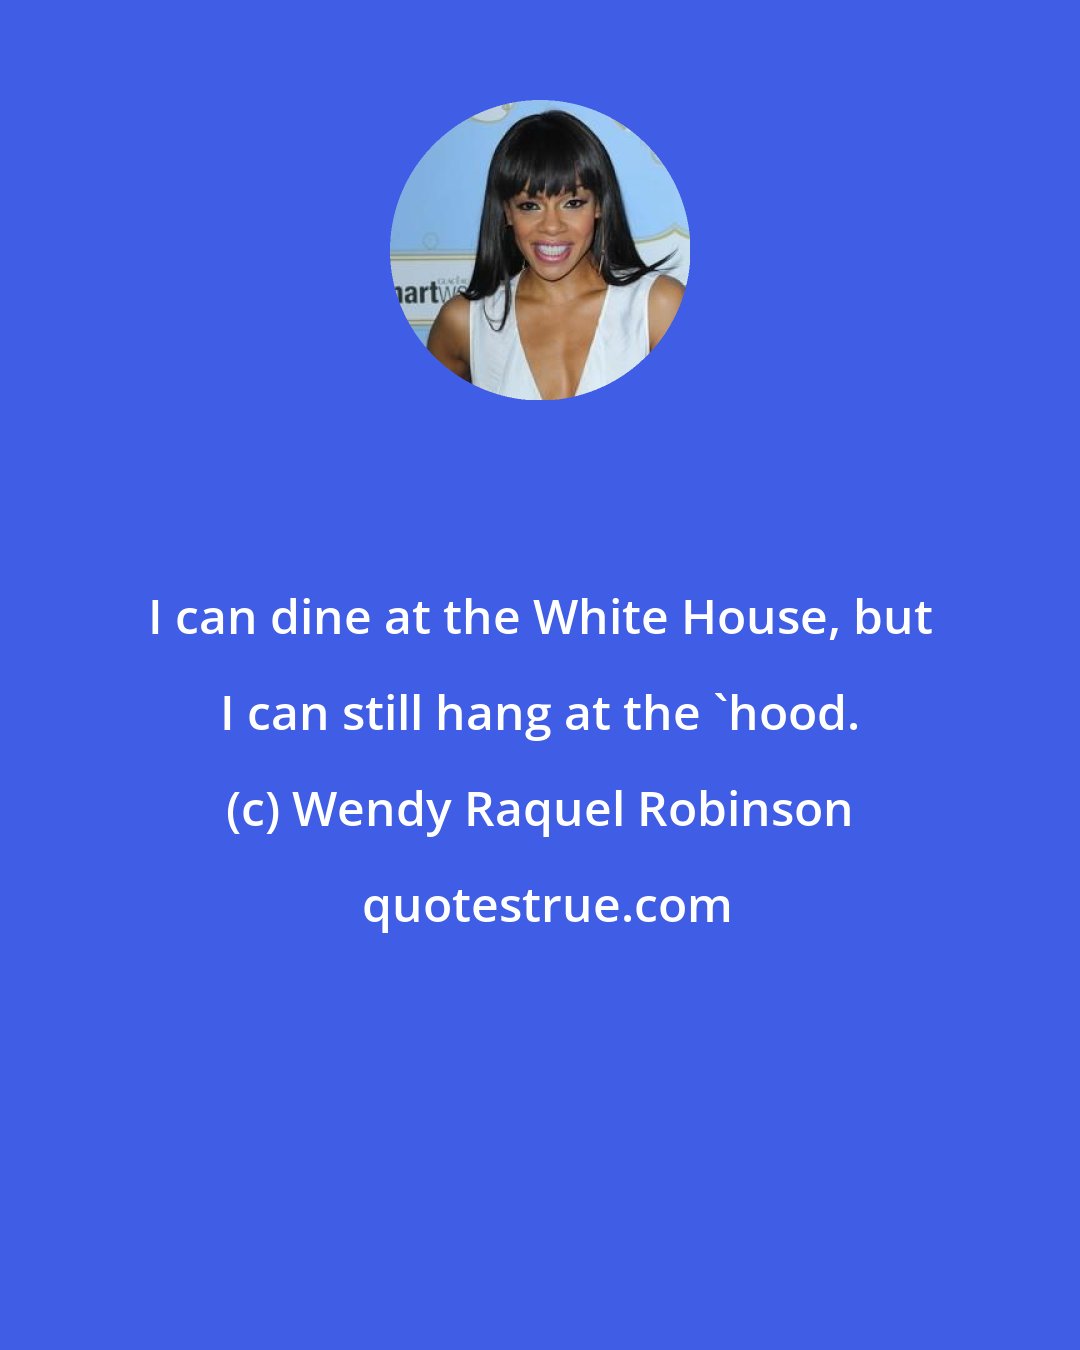 Wendy Raquel Robinson: I can dine at the White House, but I can still hang at the 'hood.